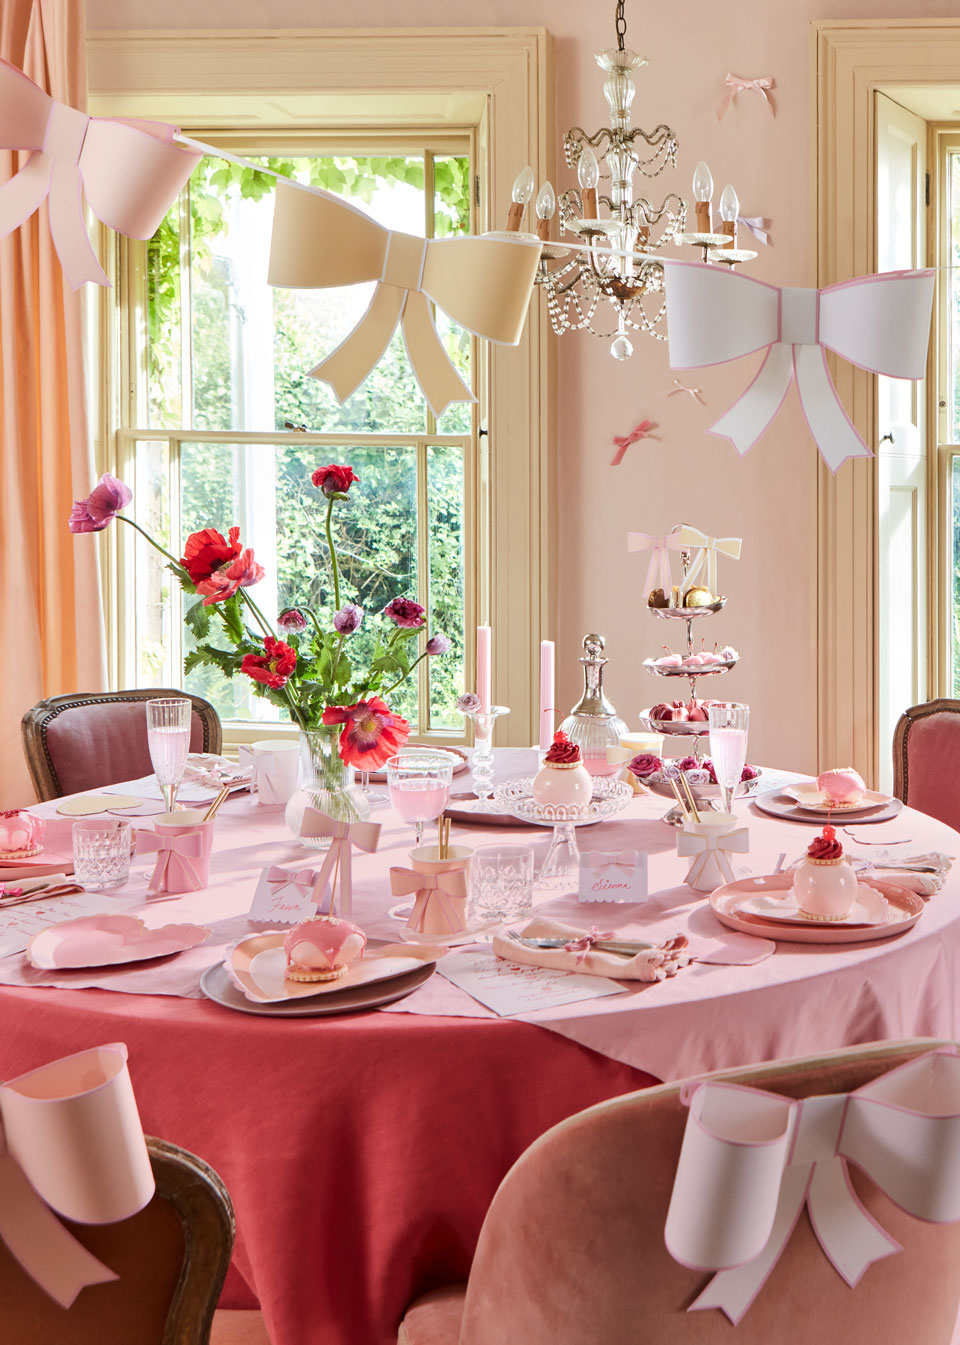 In a pink-themed dining room, a string of bows in pastel shades of pink, yellow, and blue hangs in the foreground whilst a table surrounded by dusty pink chairs is bedecked in pink heart plates and tableware accessorized with bows.